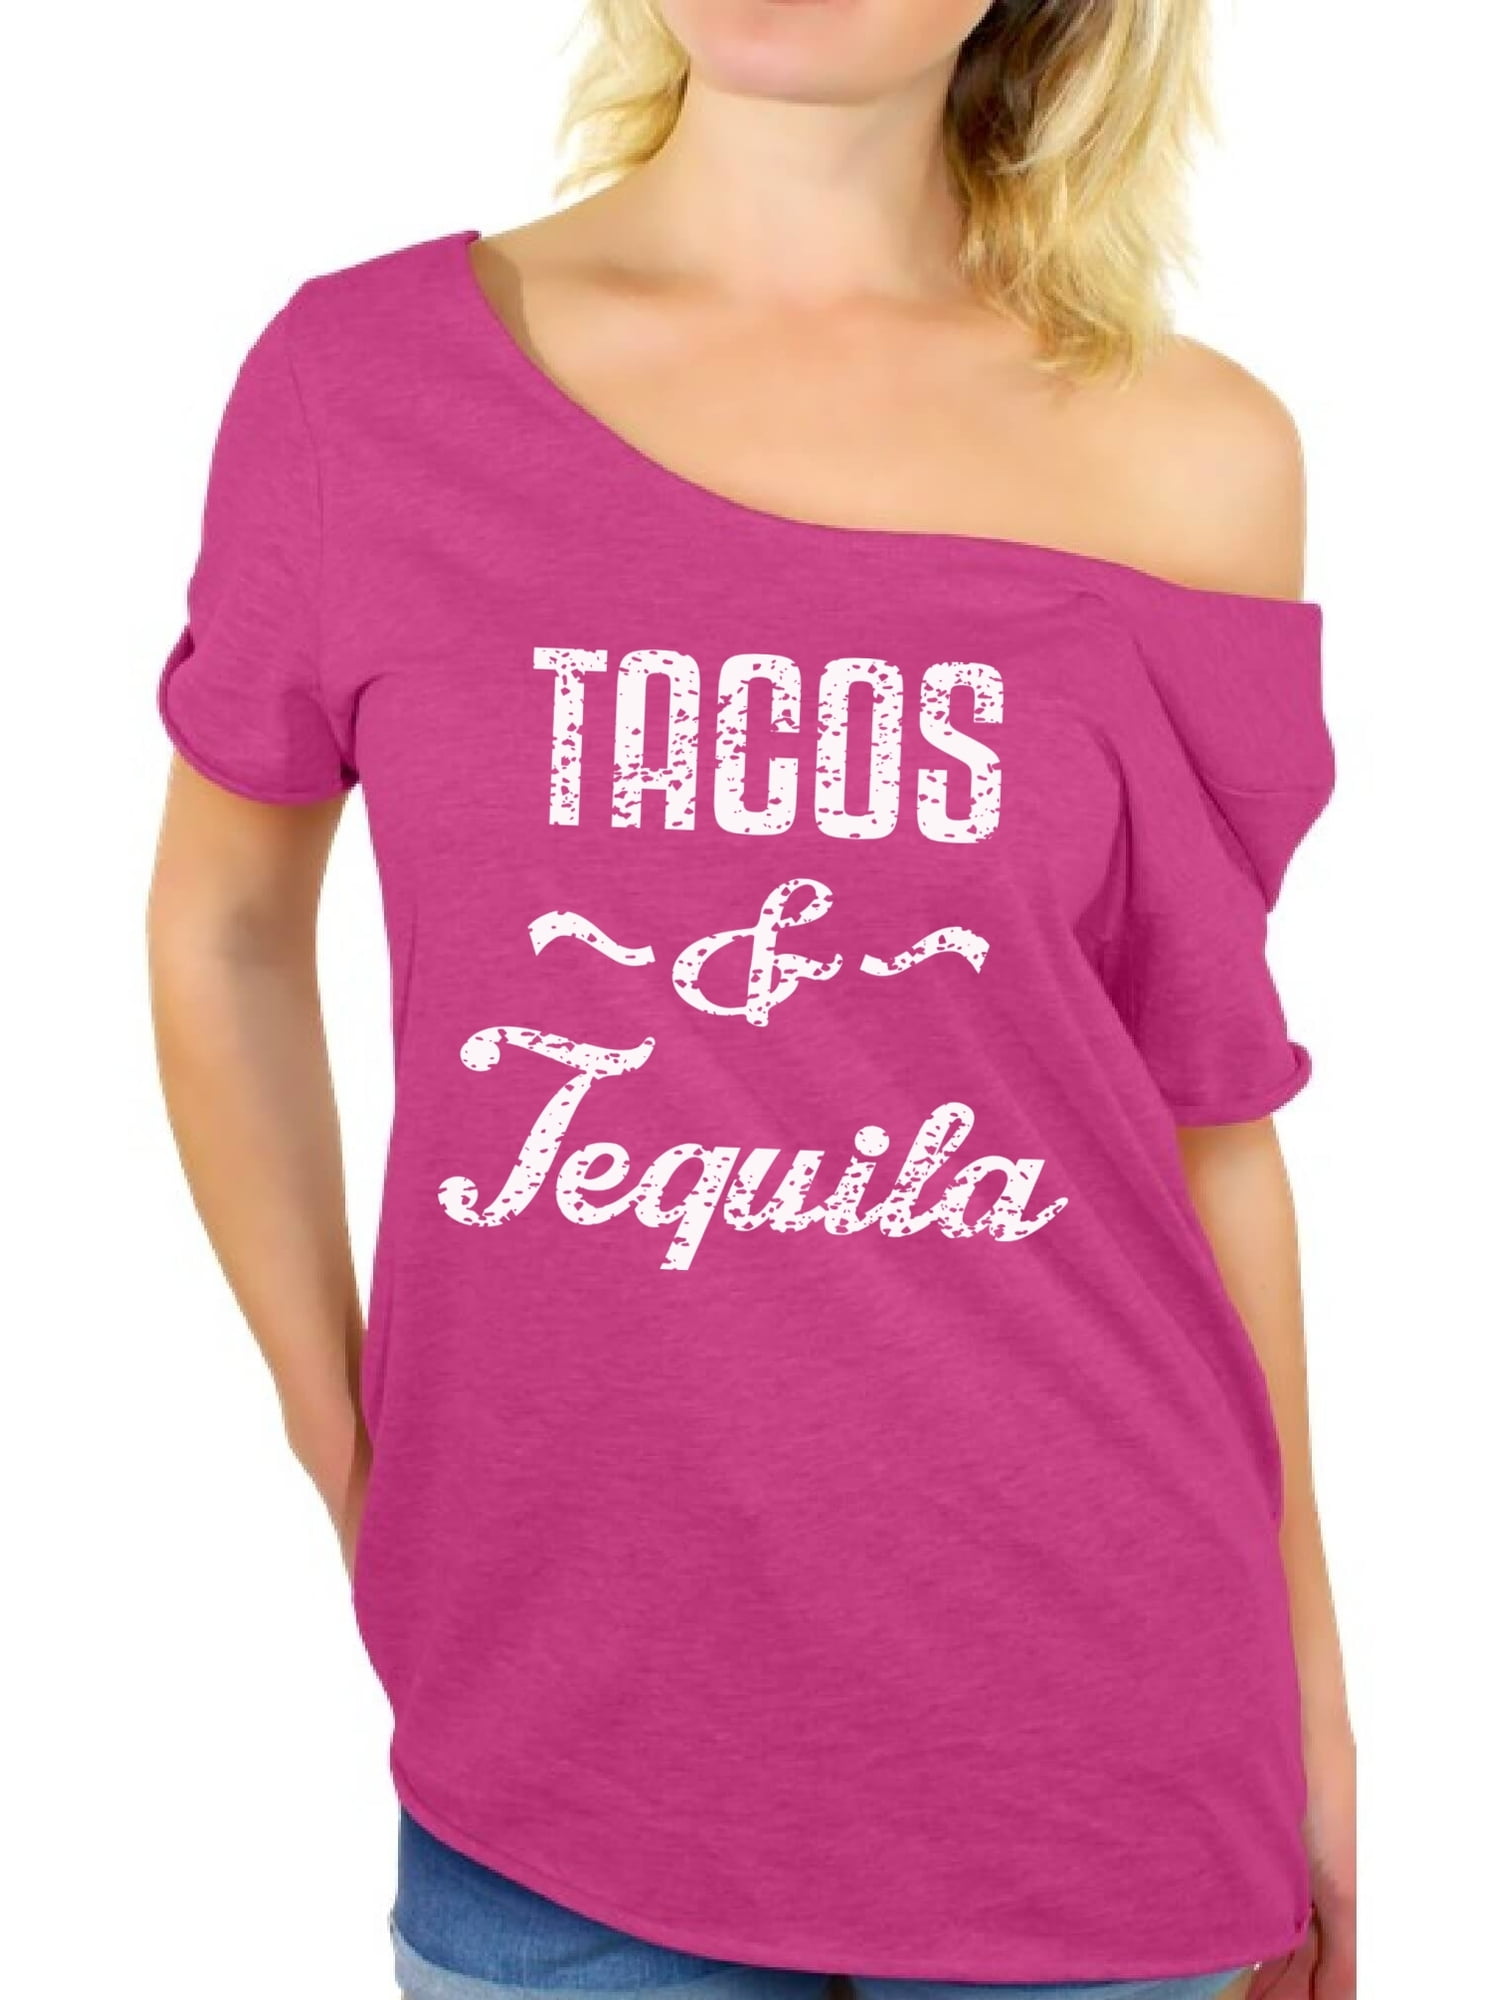 Premium Funny Tacos & Tequila Lover T Shirt Gift Best Friends Love Gifts 